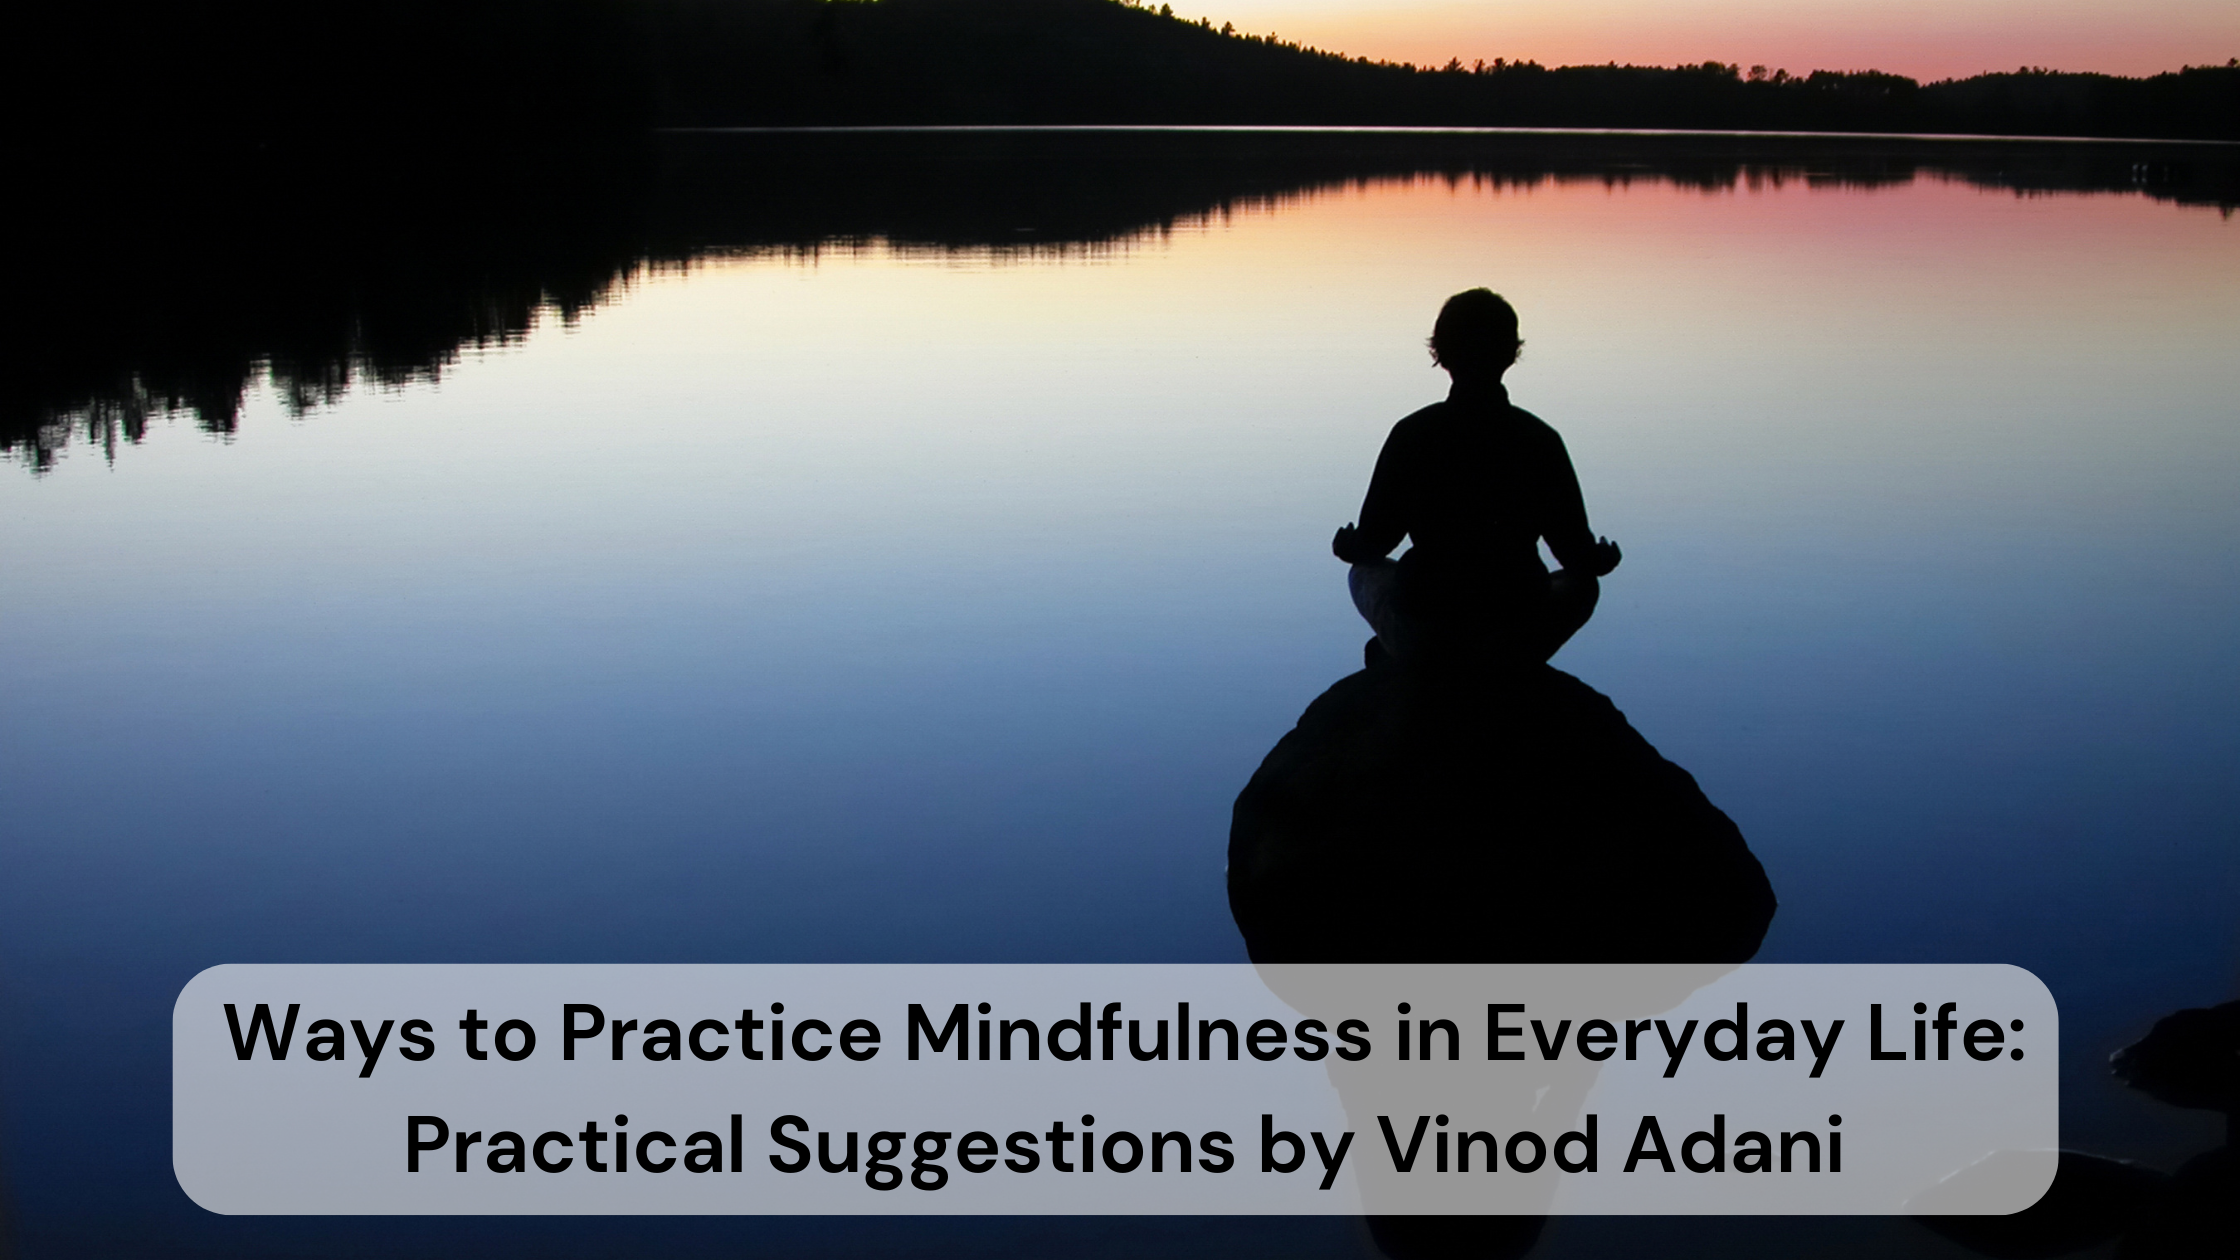 Ways to Practice Mindfulness in Everyday Life: Practical Suggestions by Vinod Adani